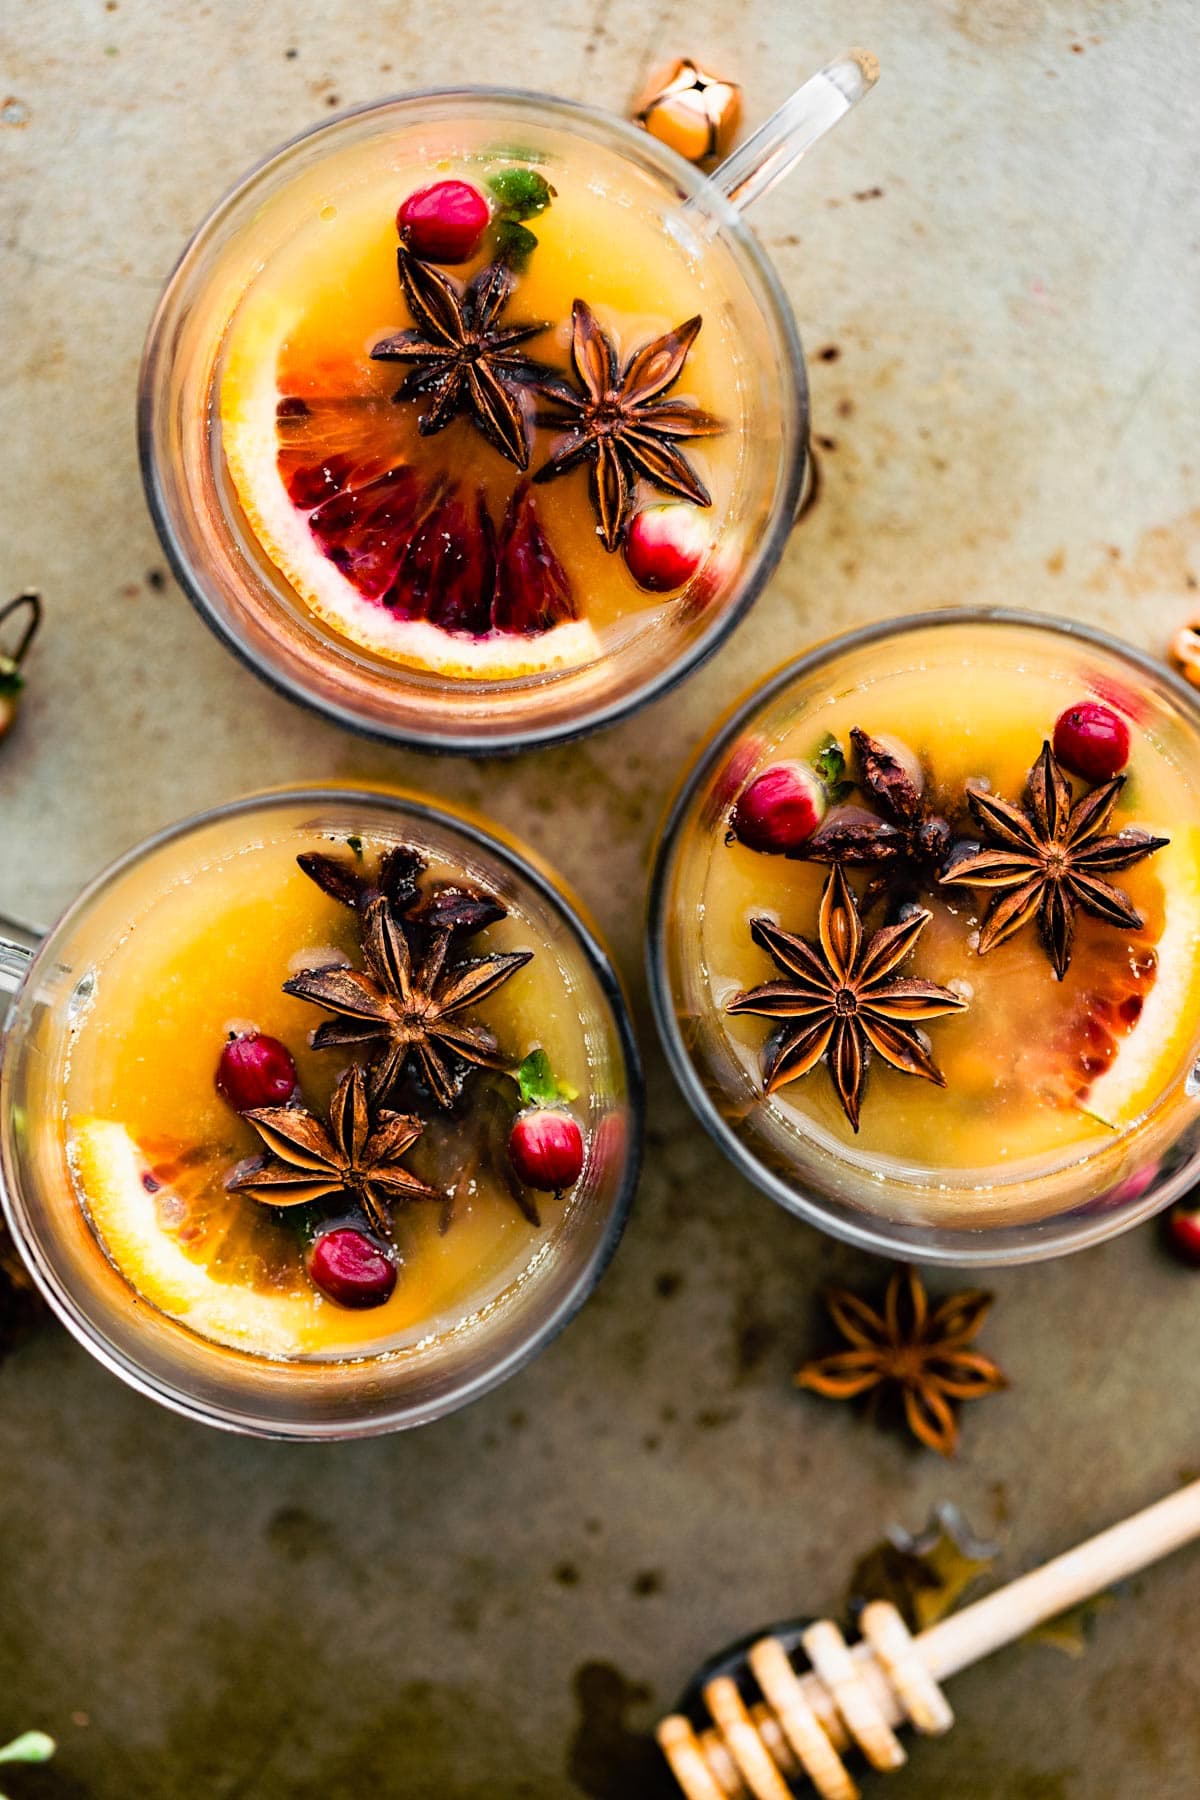 Three glasses with hot toddy with spiced rum arranged together, fresh fruit and spices floating in liquid.